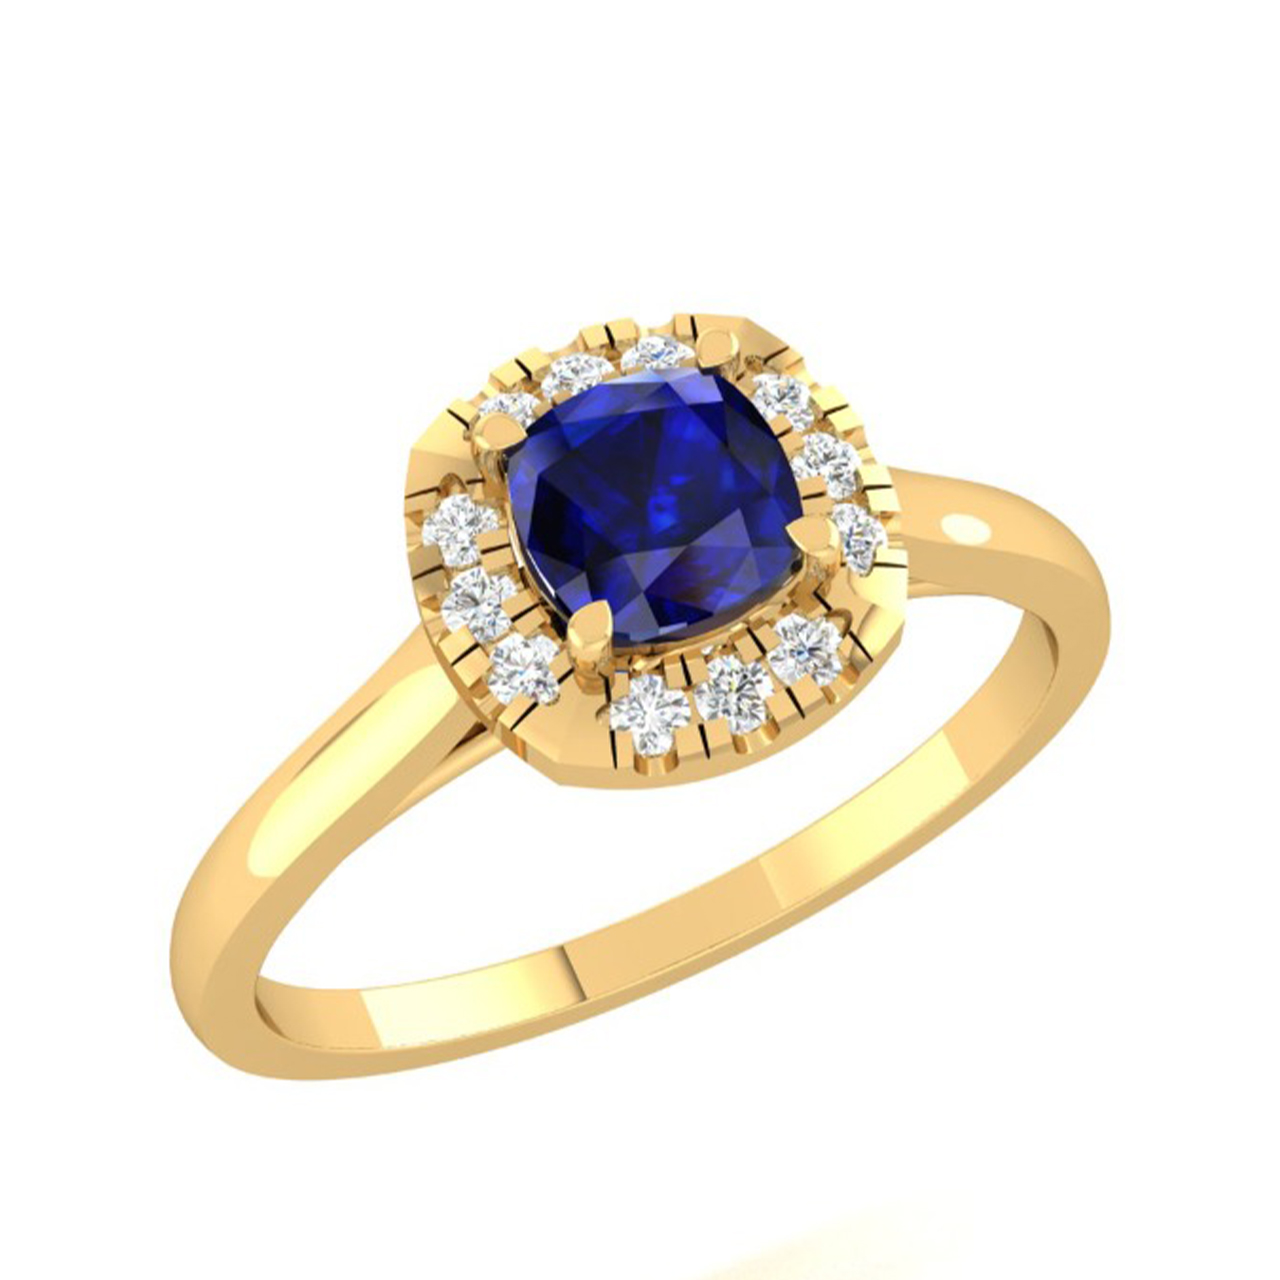 Diamond Ring With Blue Colour Stone